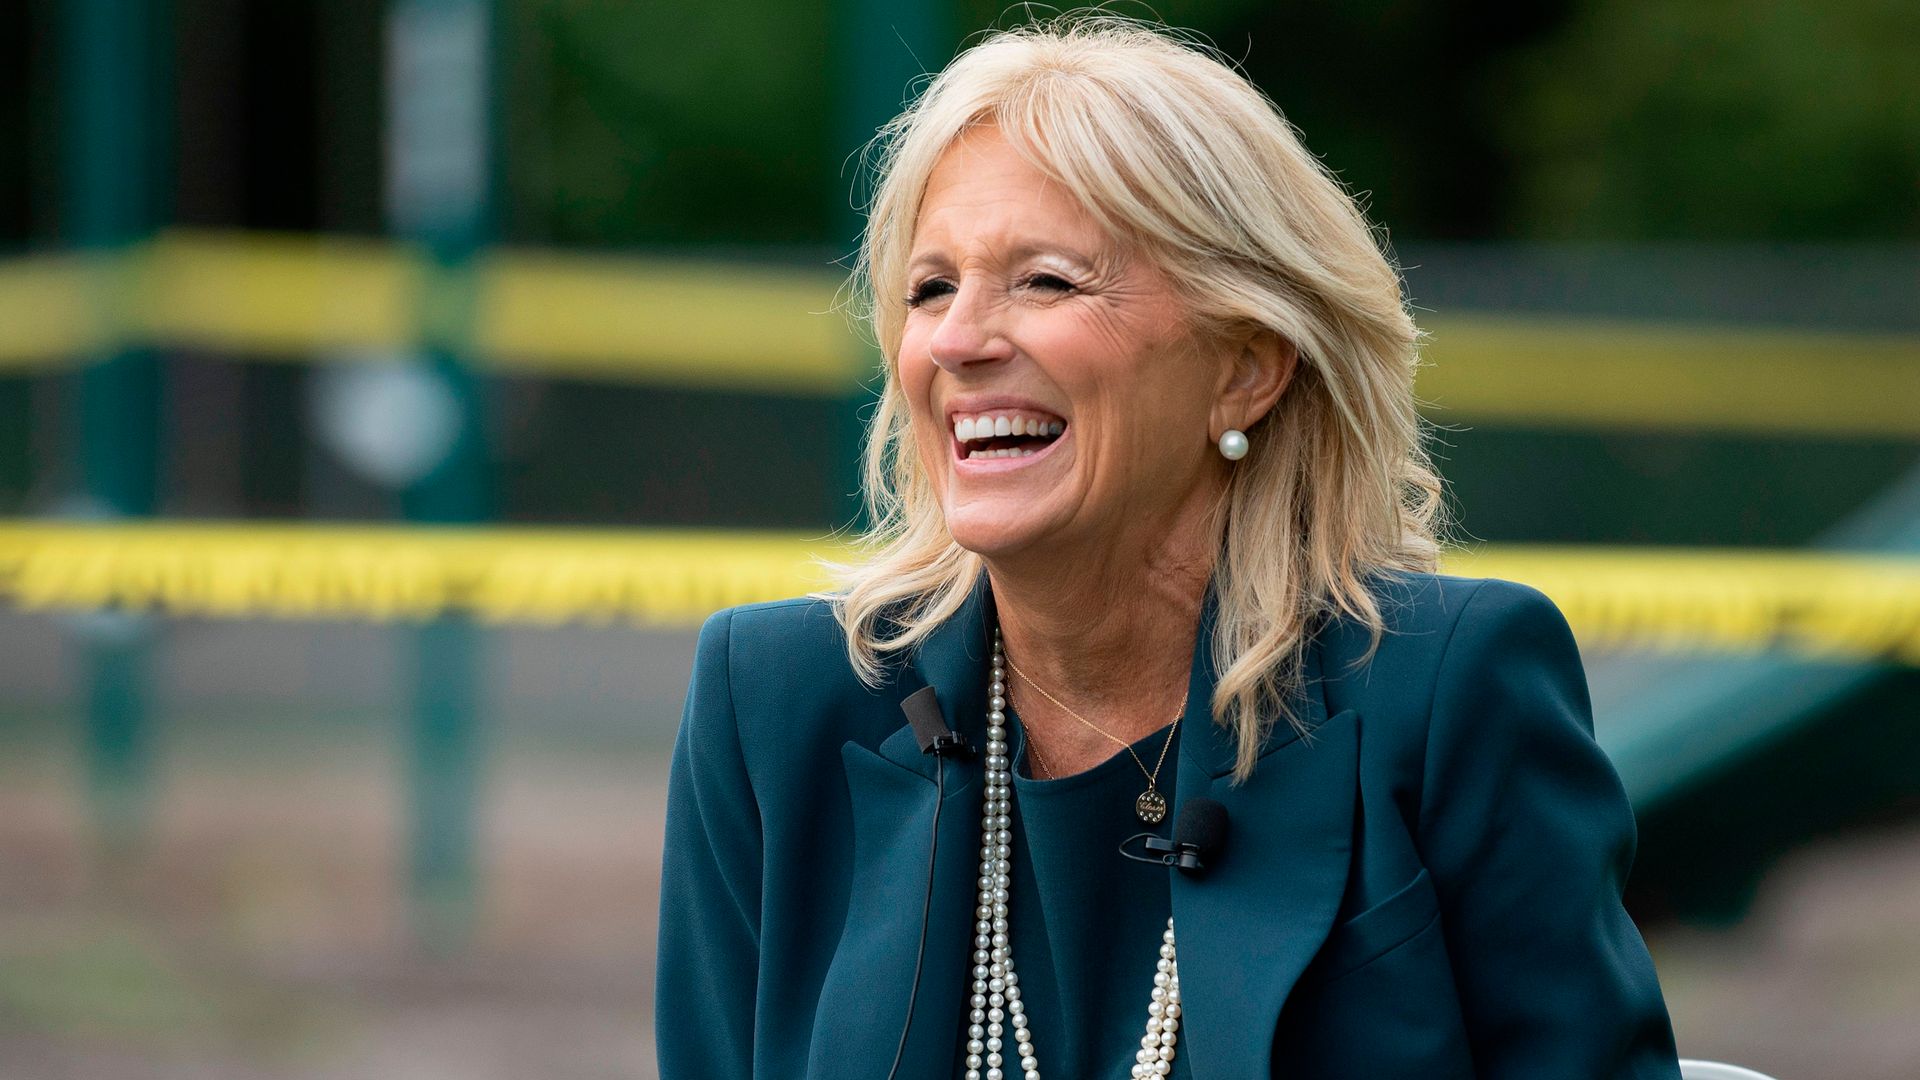 Jill Biden smiling in a teal suit and a pearl necklace